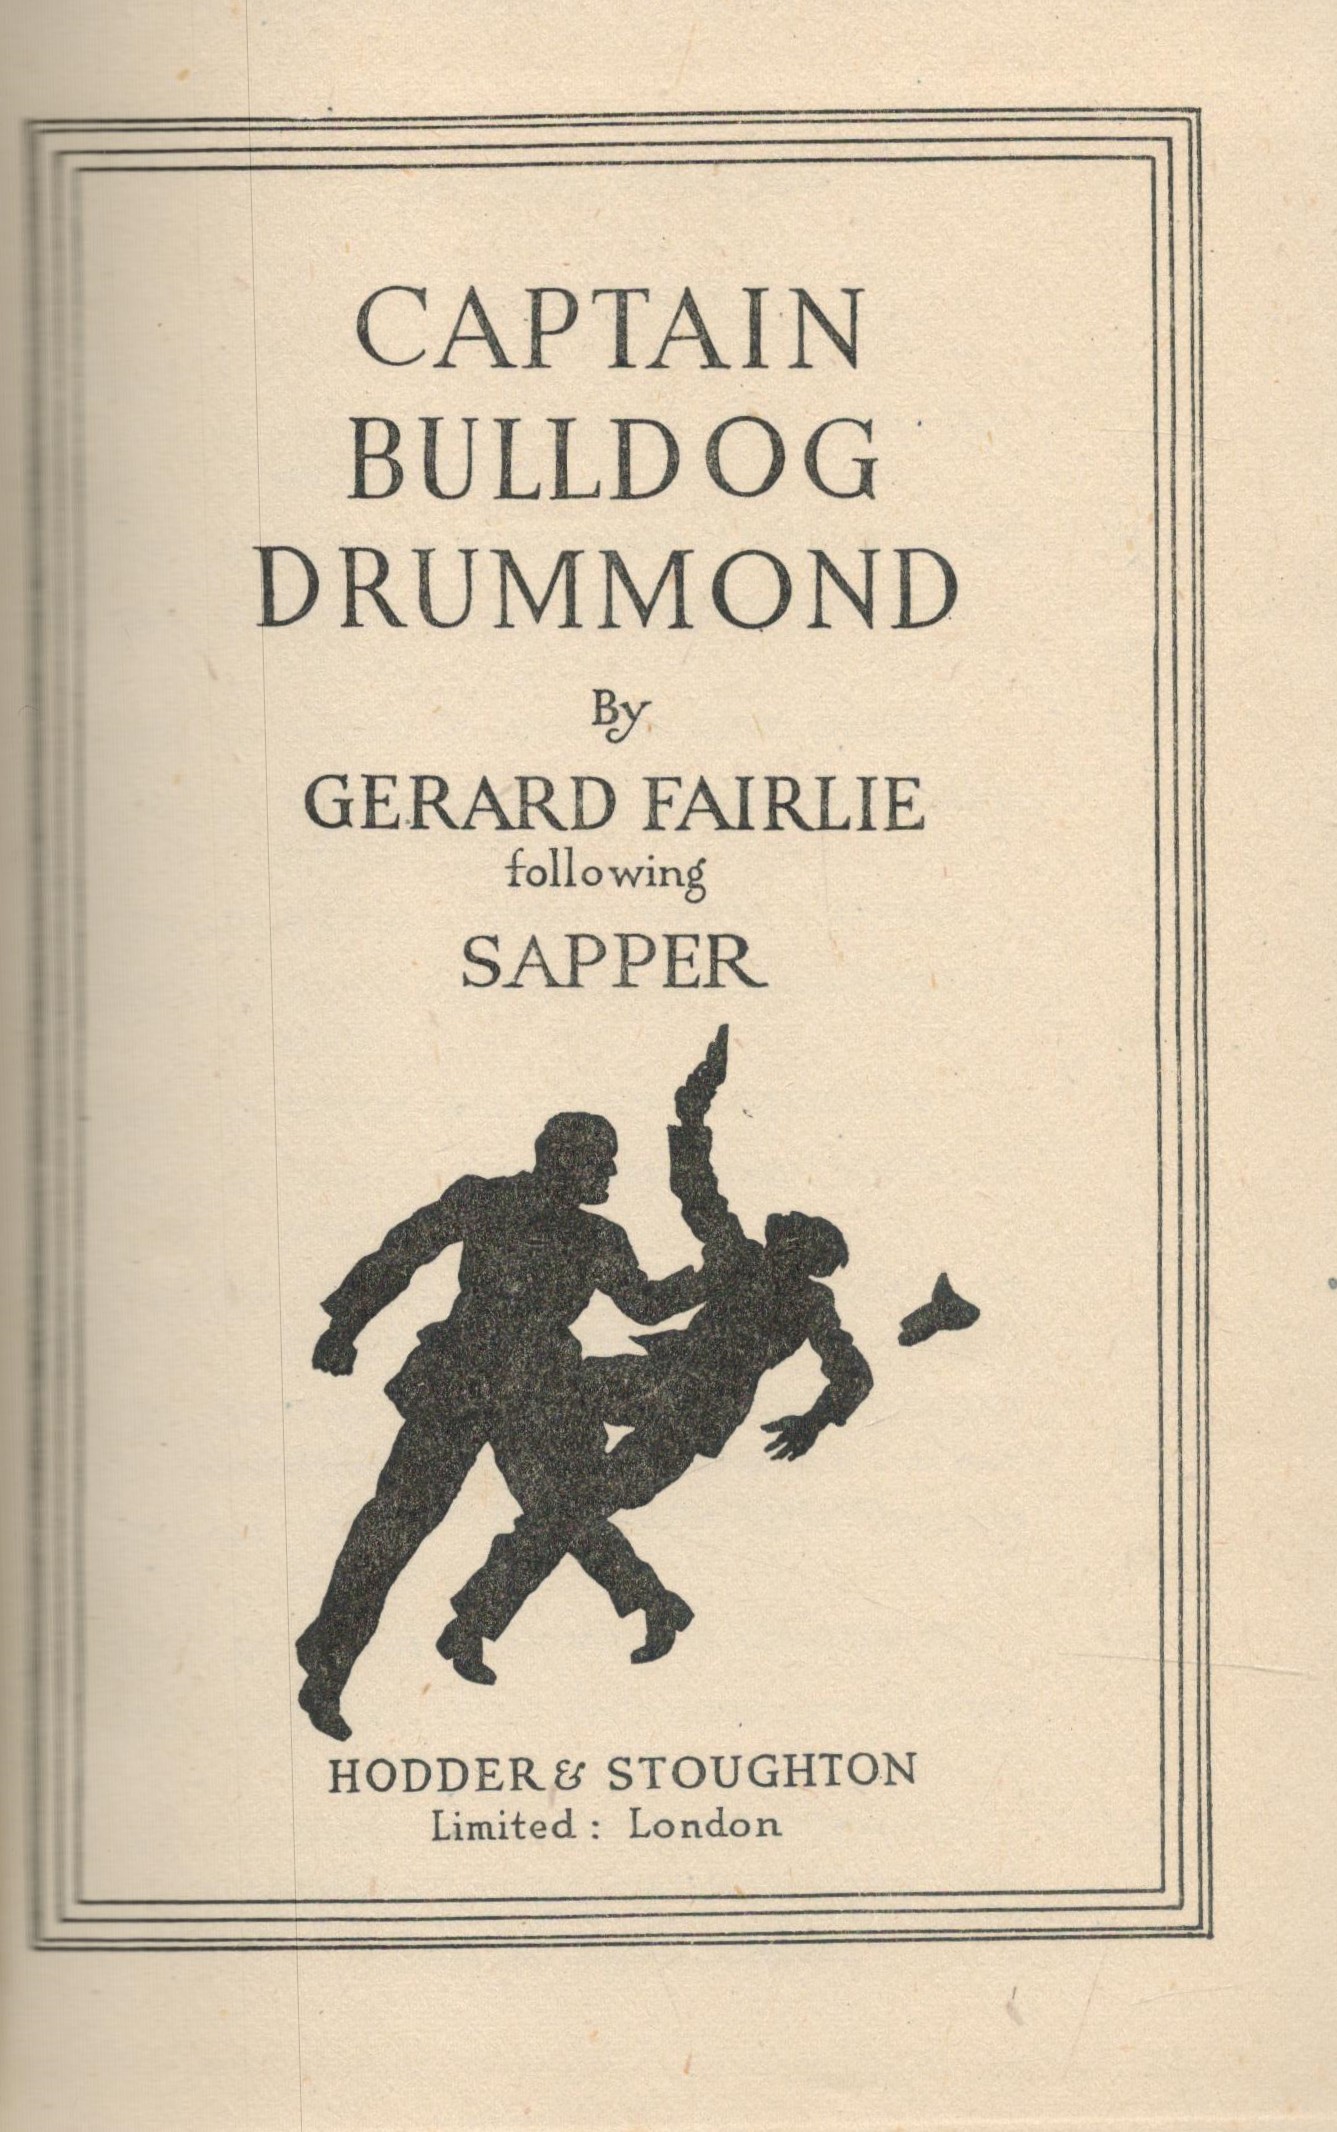 Captain Bulldog Drummond by Gerald Fairlie following Sapper 1945 First Edition Hardback book with - Image 2 of 3